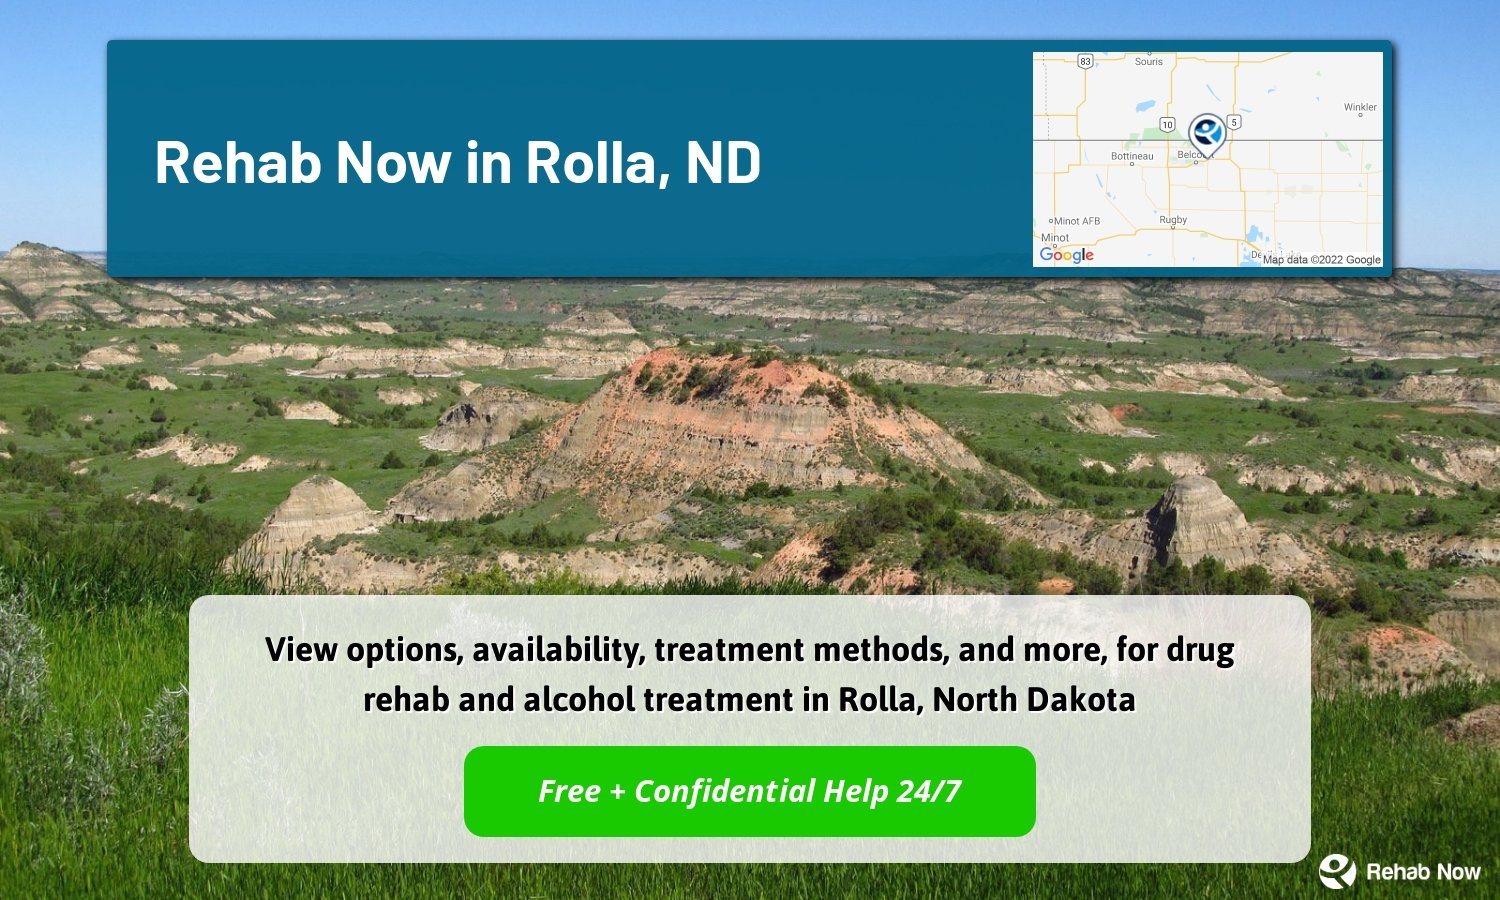 View options, availability, treatment methods, and more, for drug rehab and alcohol treatment in Rolla, North Dakota